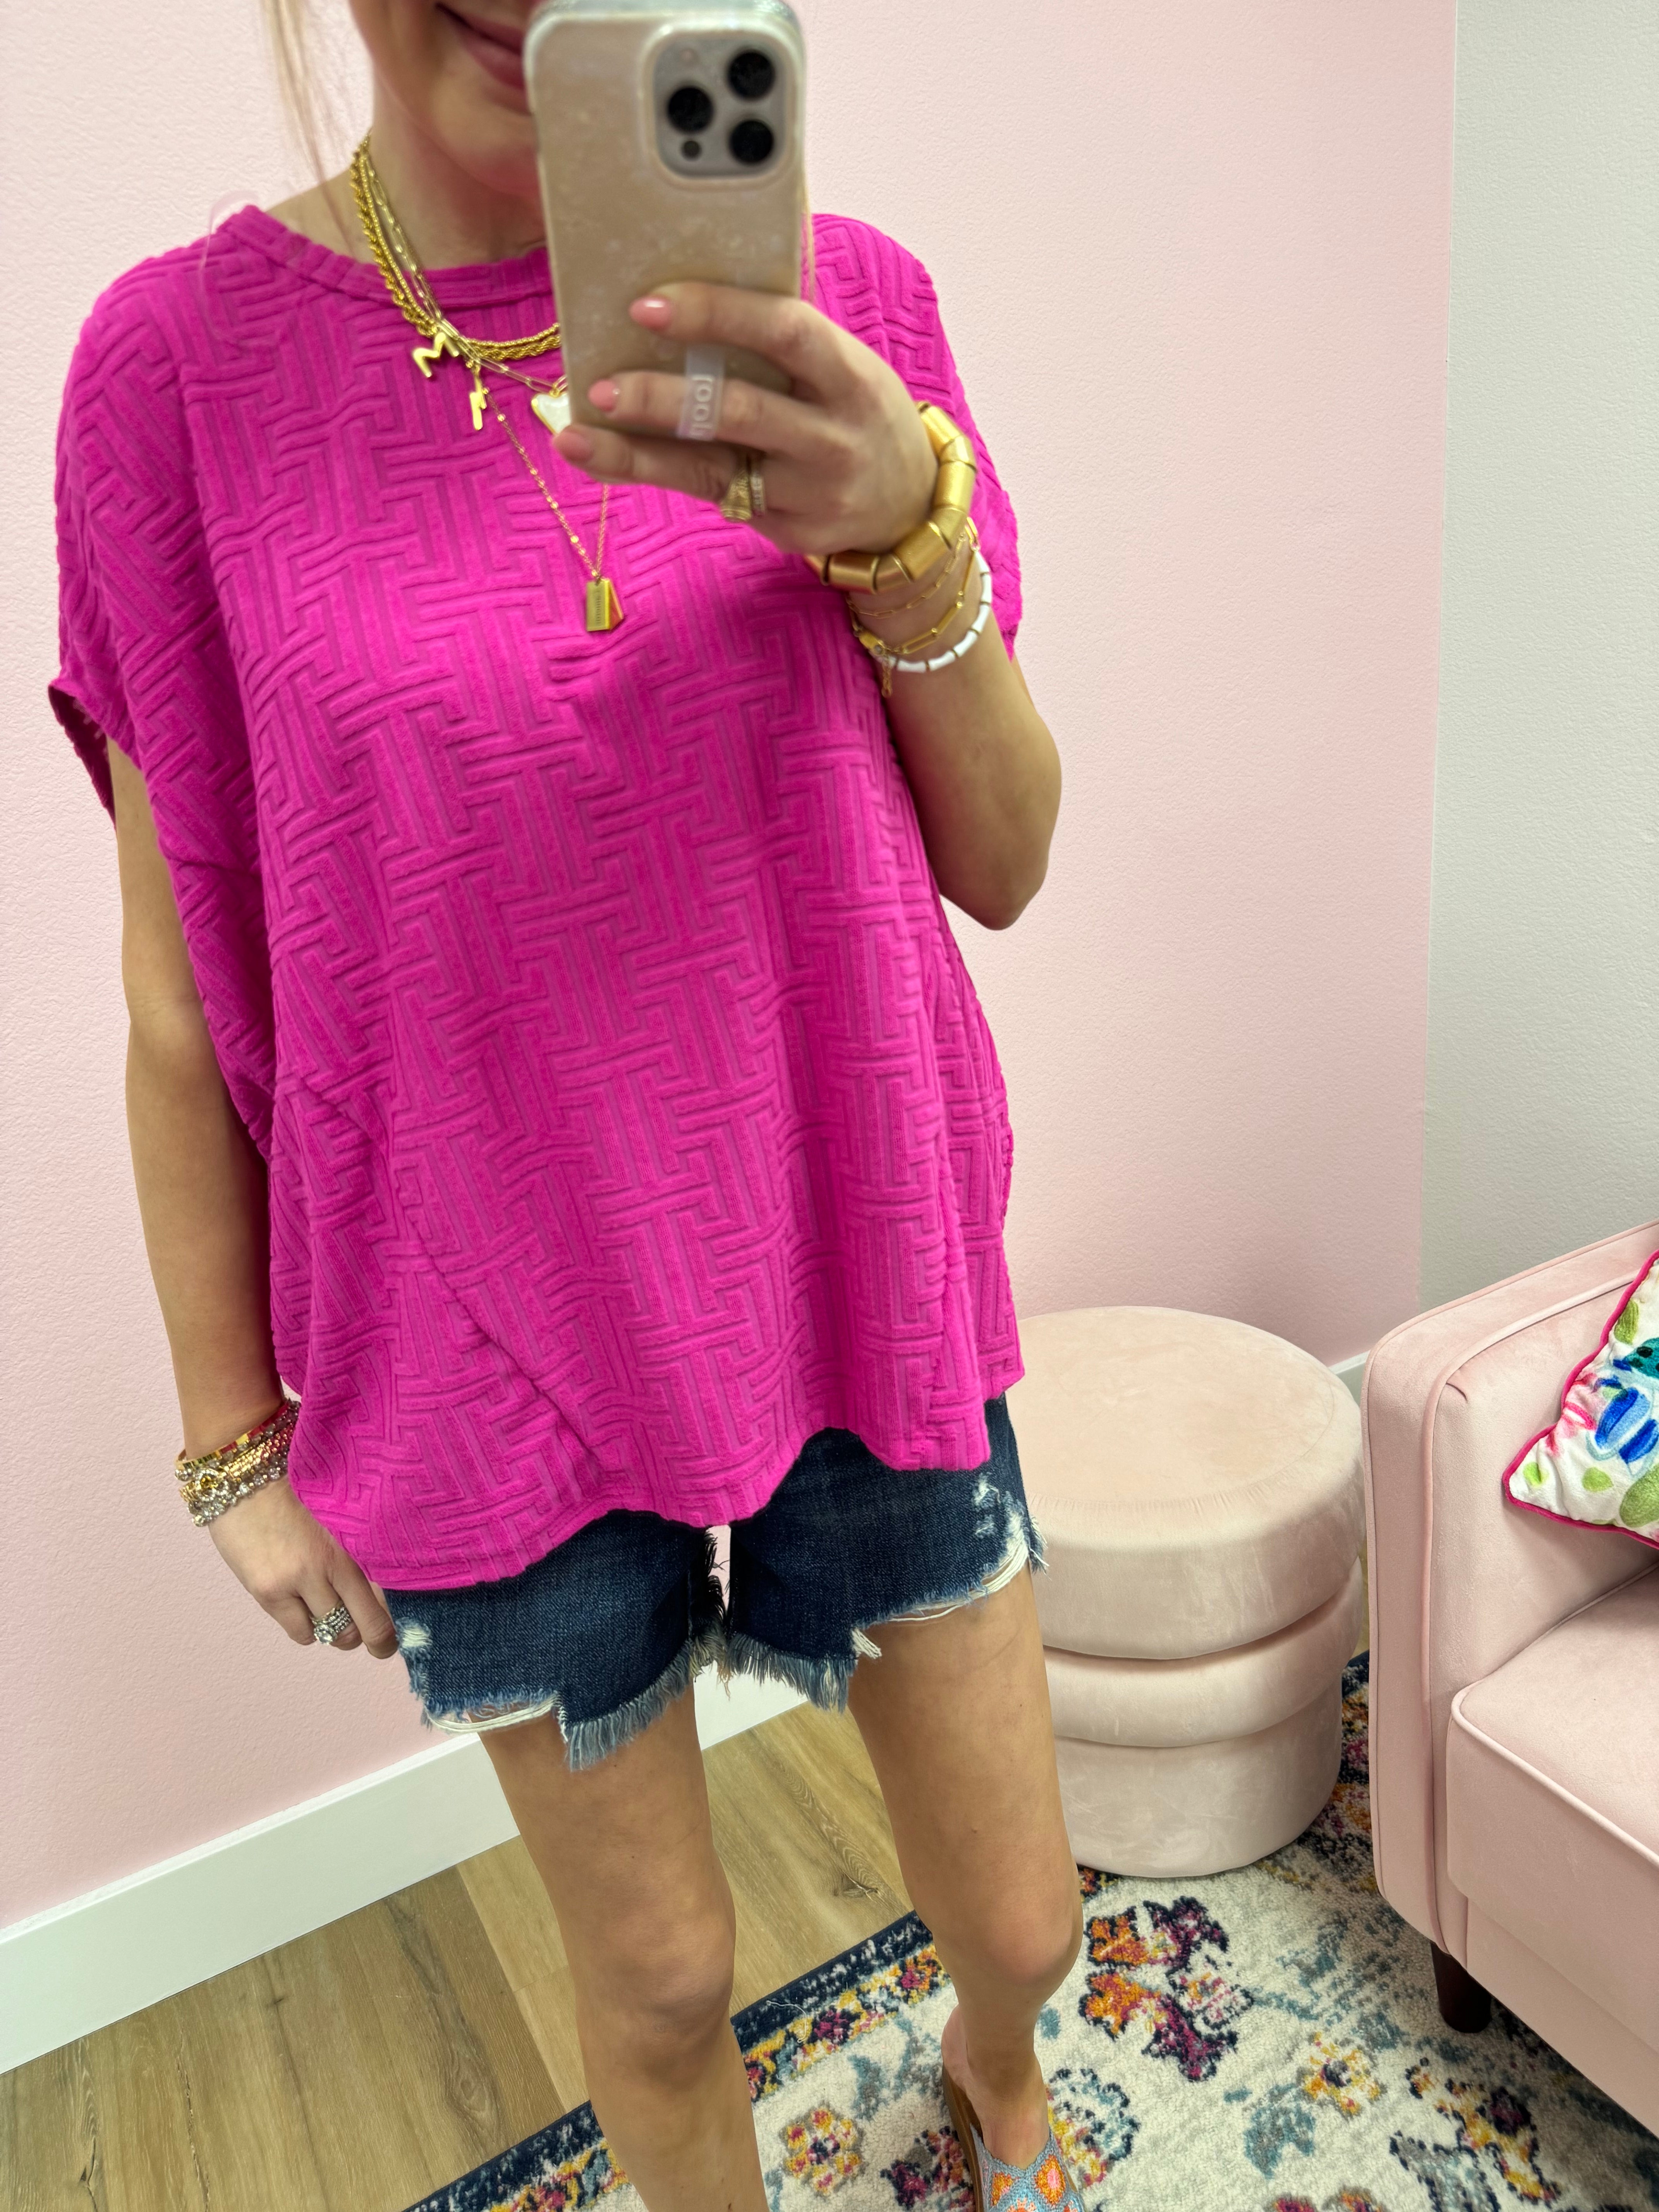 Magenta French Terry Design Top